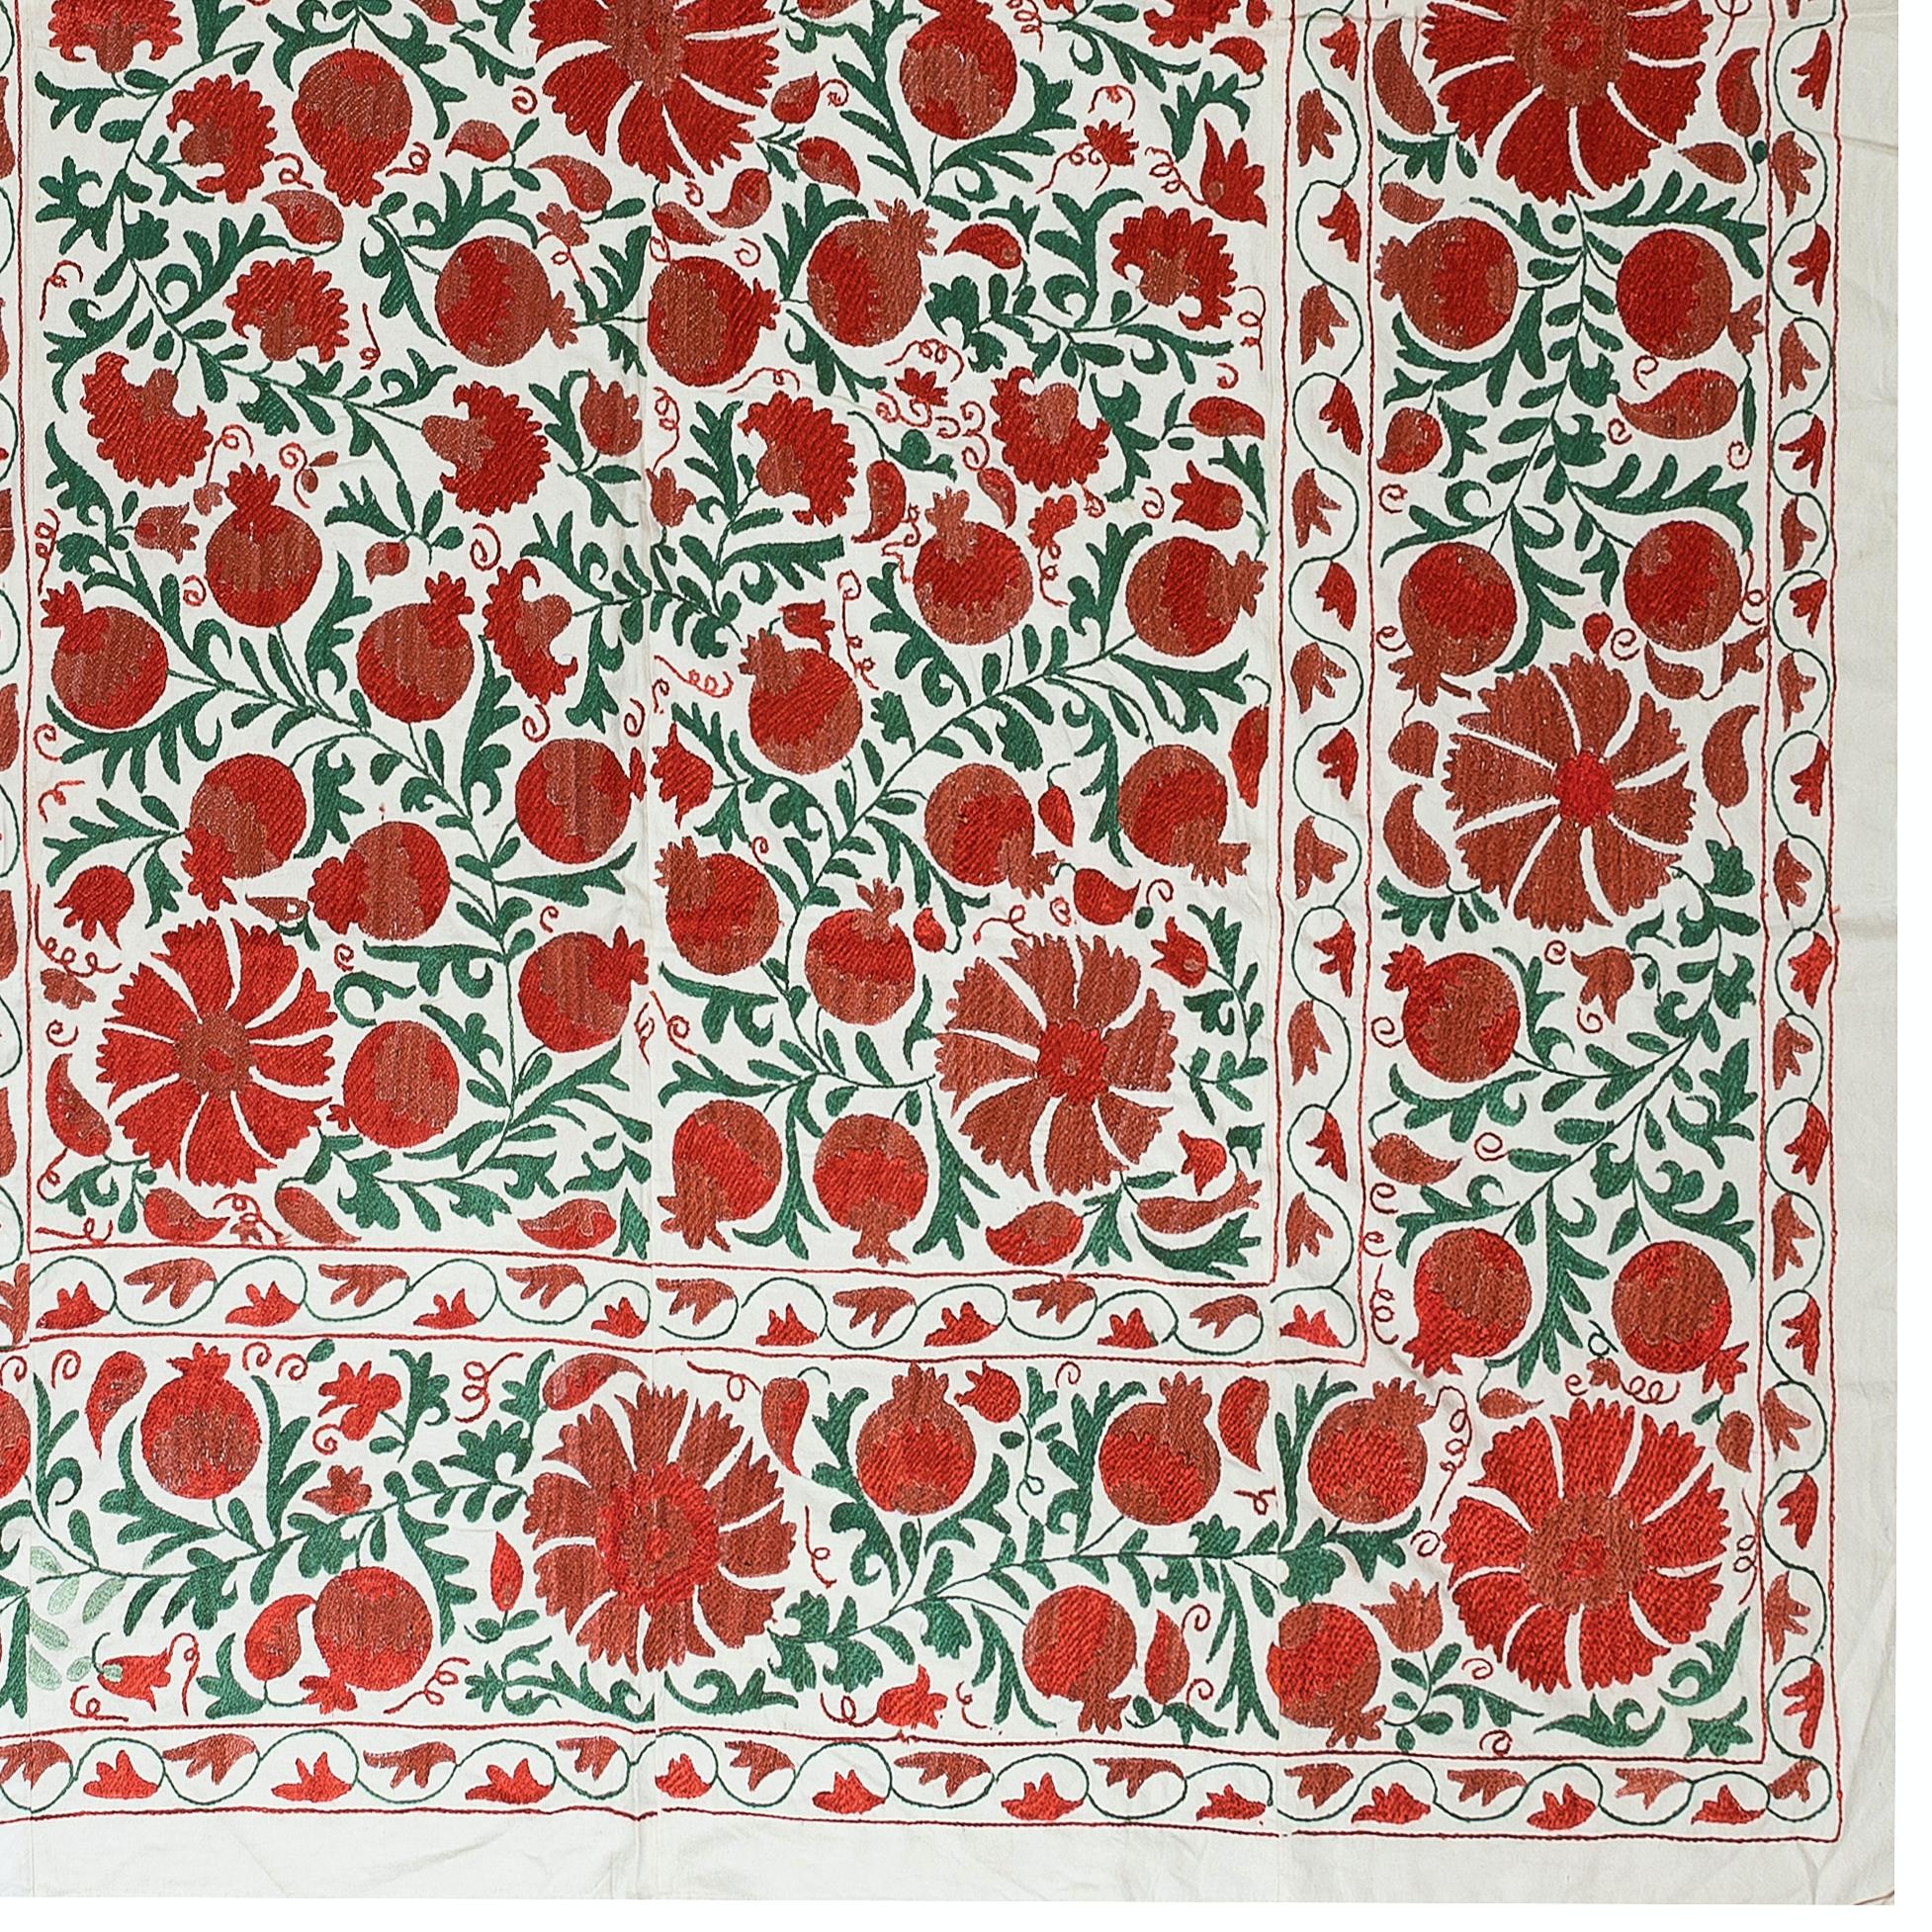 Embroidered 6.3x8.3 Ft Silk Embroidery Bed Cover in Cream, Red & Green, Suzani Wall Hanging For Sale